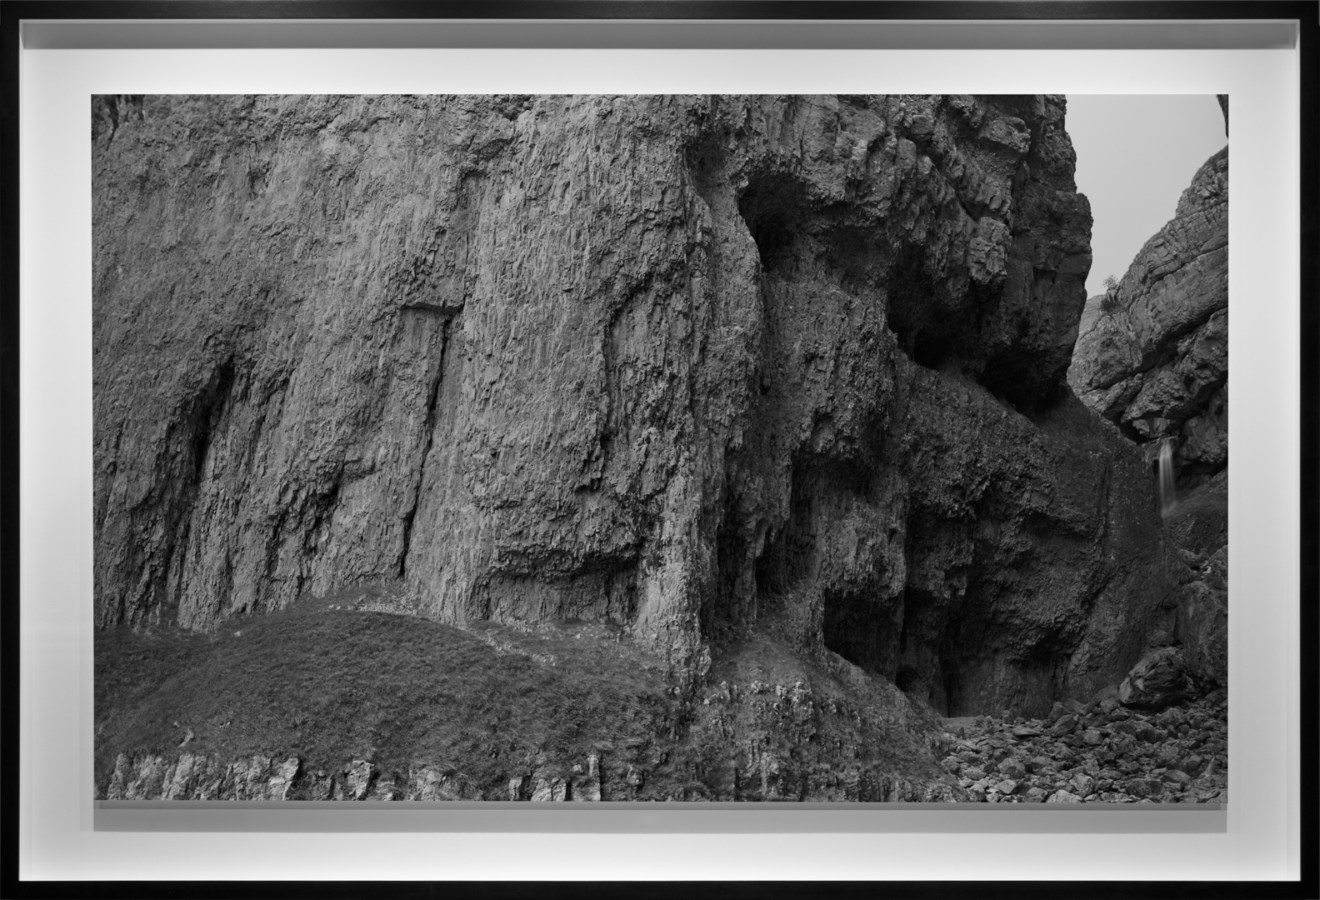 Black-and-white photograph of the stony base of a rough bare cliff face